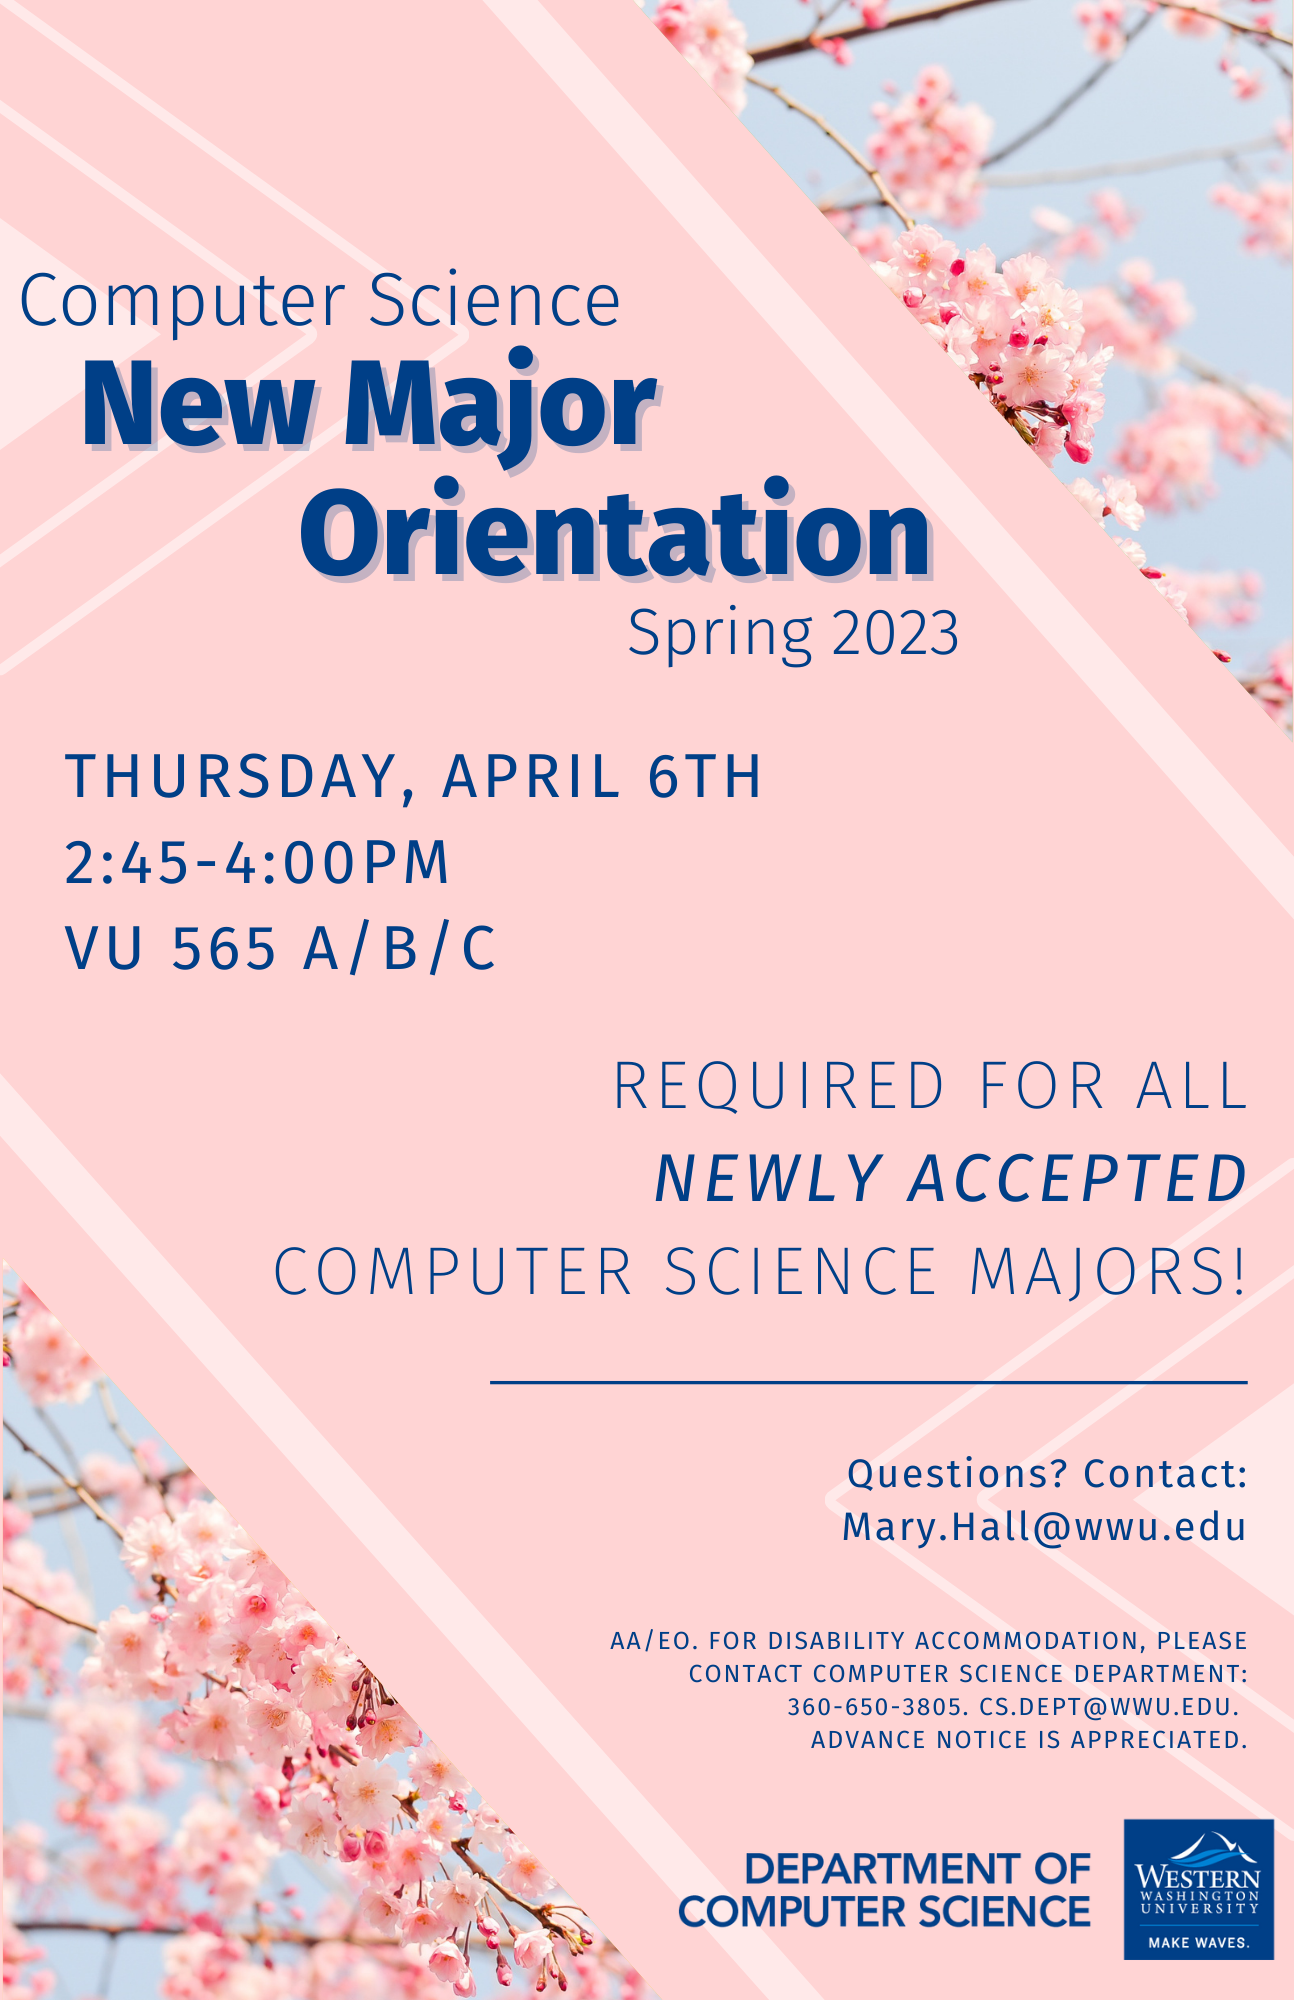 Computer Science New Major Orientation. Required for All Newly Accepted Computer Science Majors! Thursday, April 6th from 2:45 to 4:00 PM in VU 565.